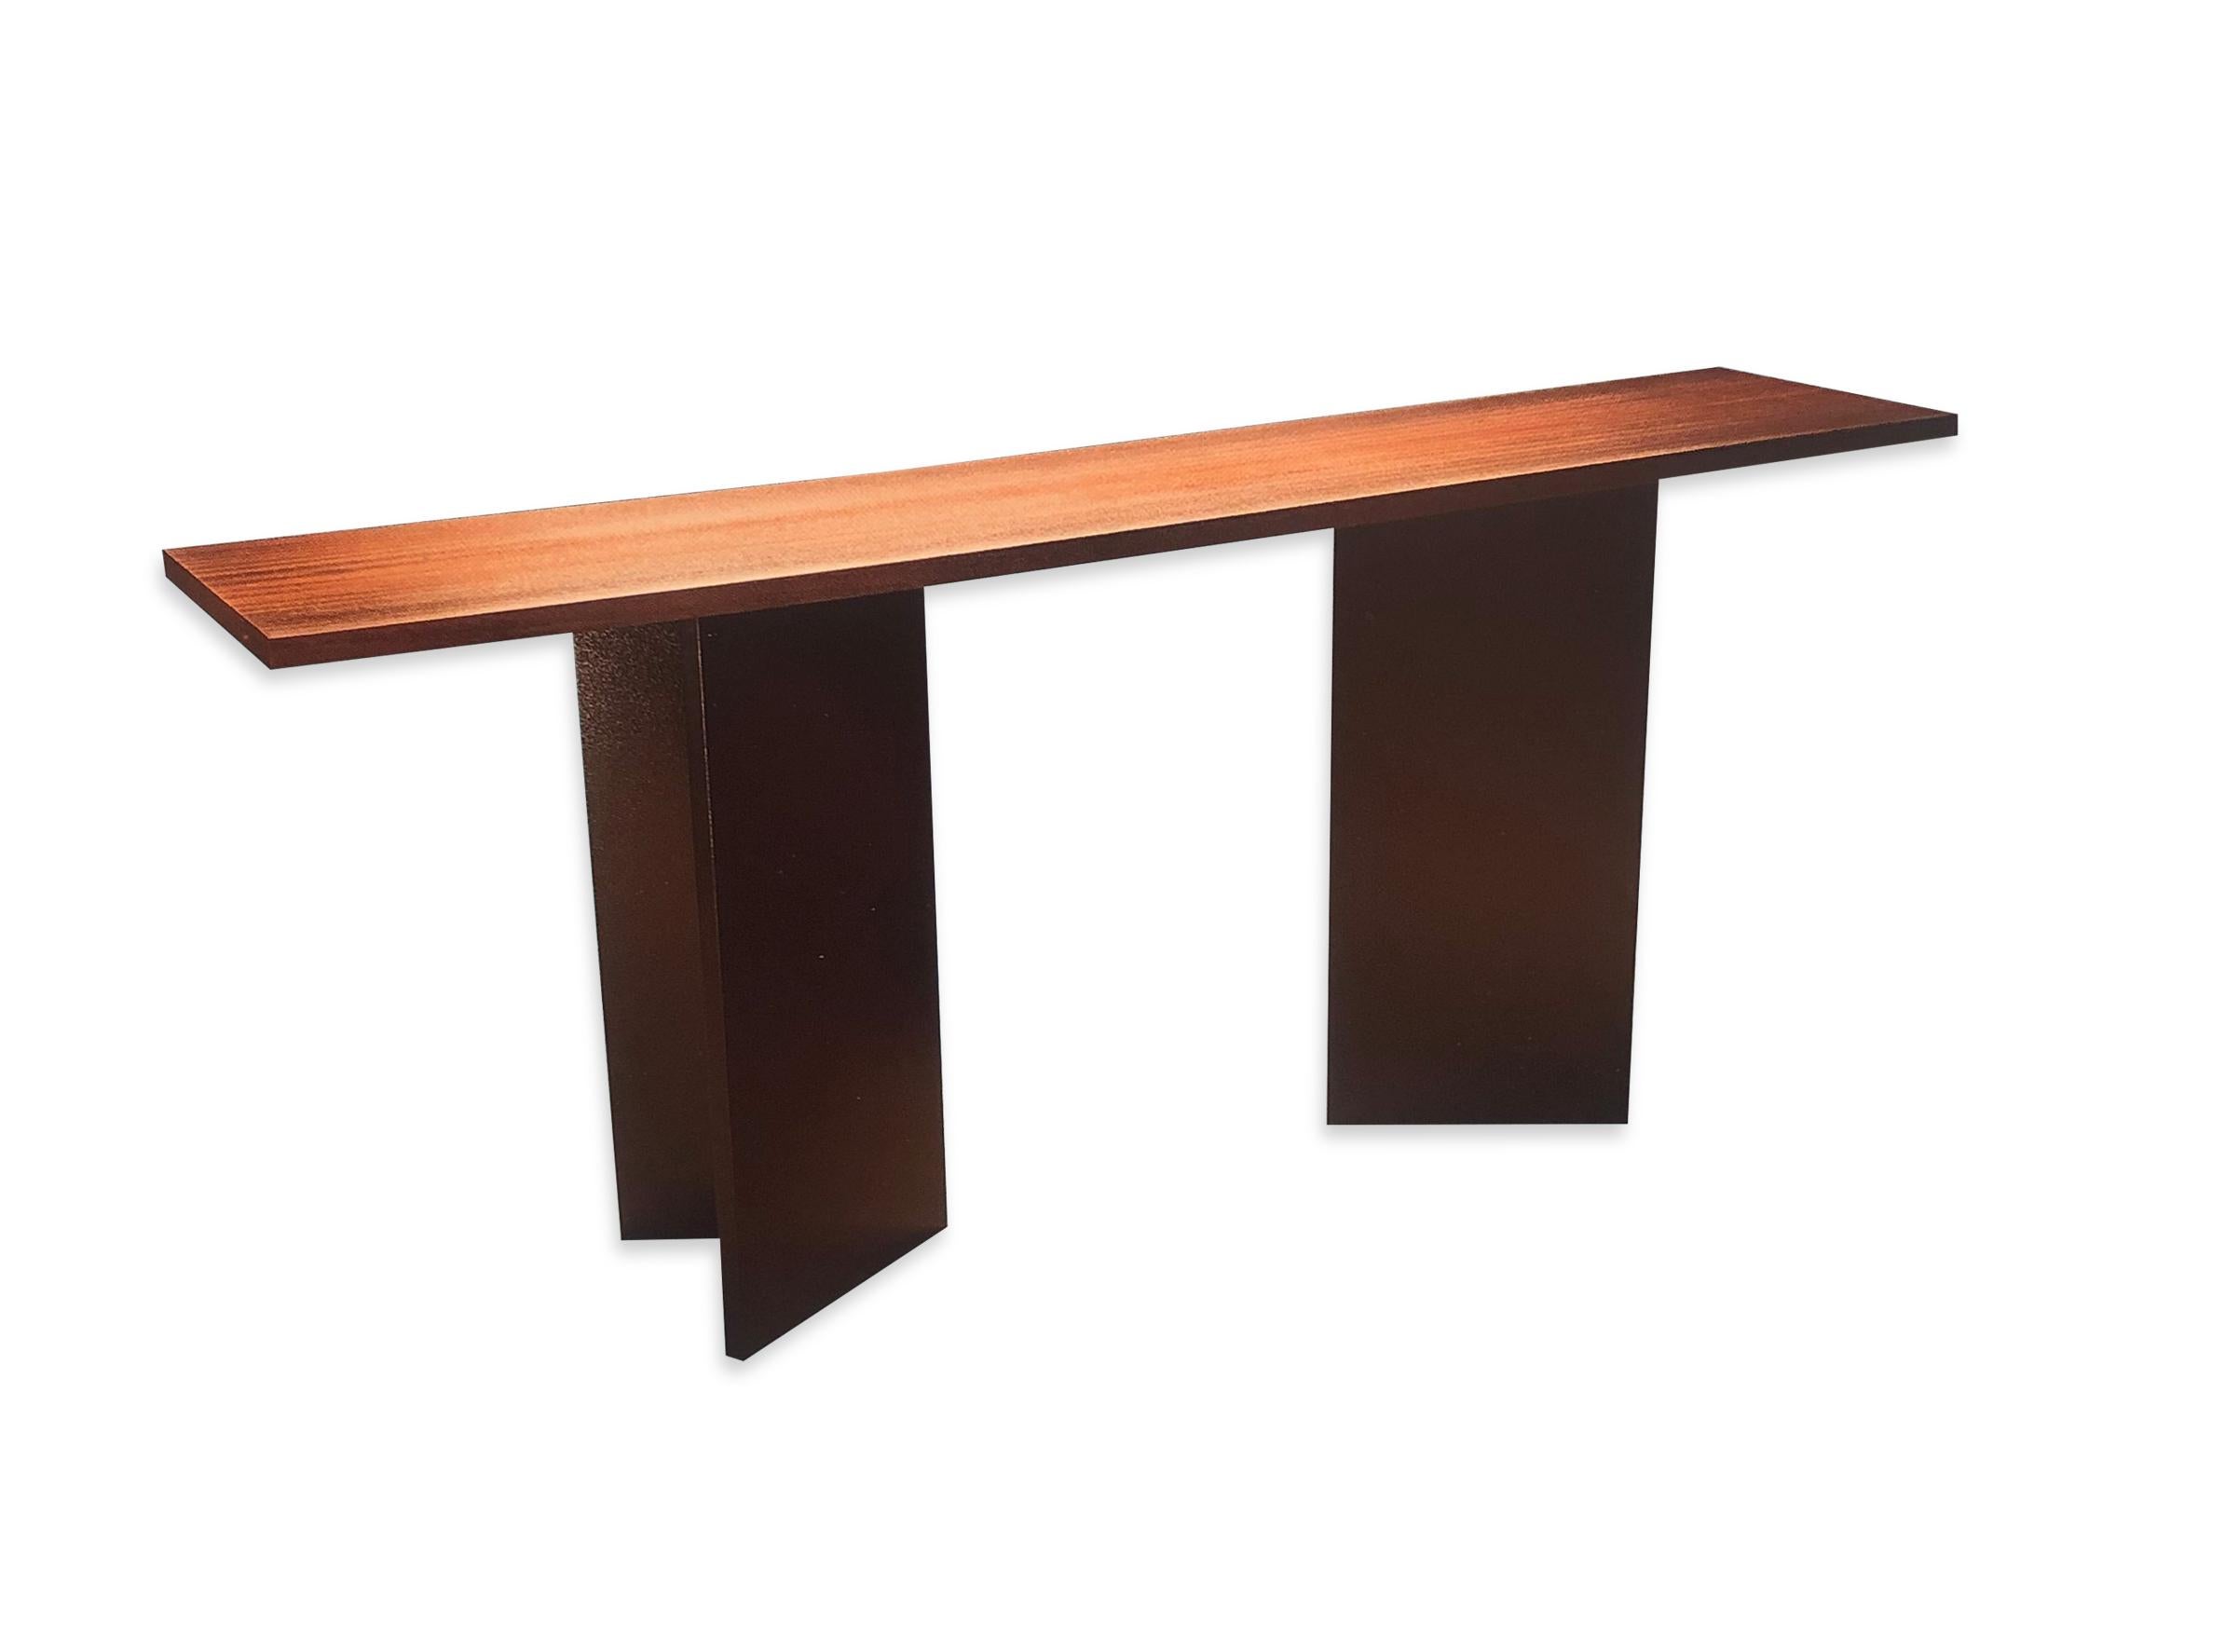 This elegant metal and wood console table was designed by Jun Montoya. This exquisite piece was part of his 2015 furniture collection. 

Property from esteemed interior designer Juan Montoya. Juan Montoya is one of the most acclaimed and prolific